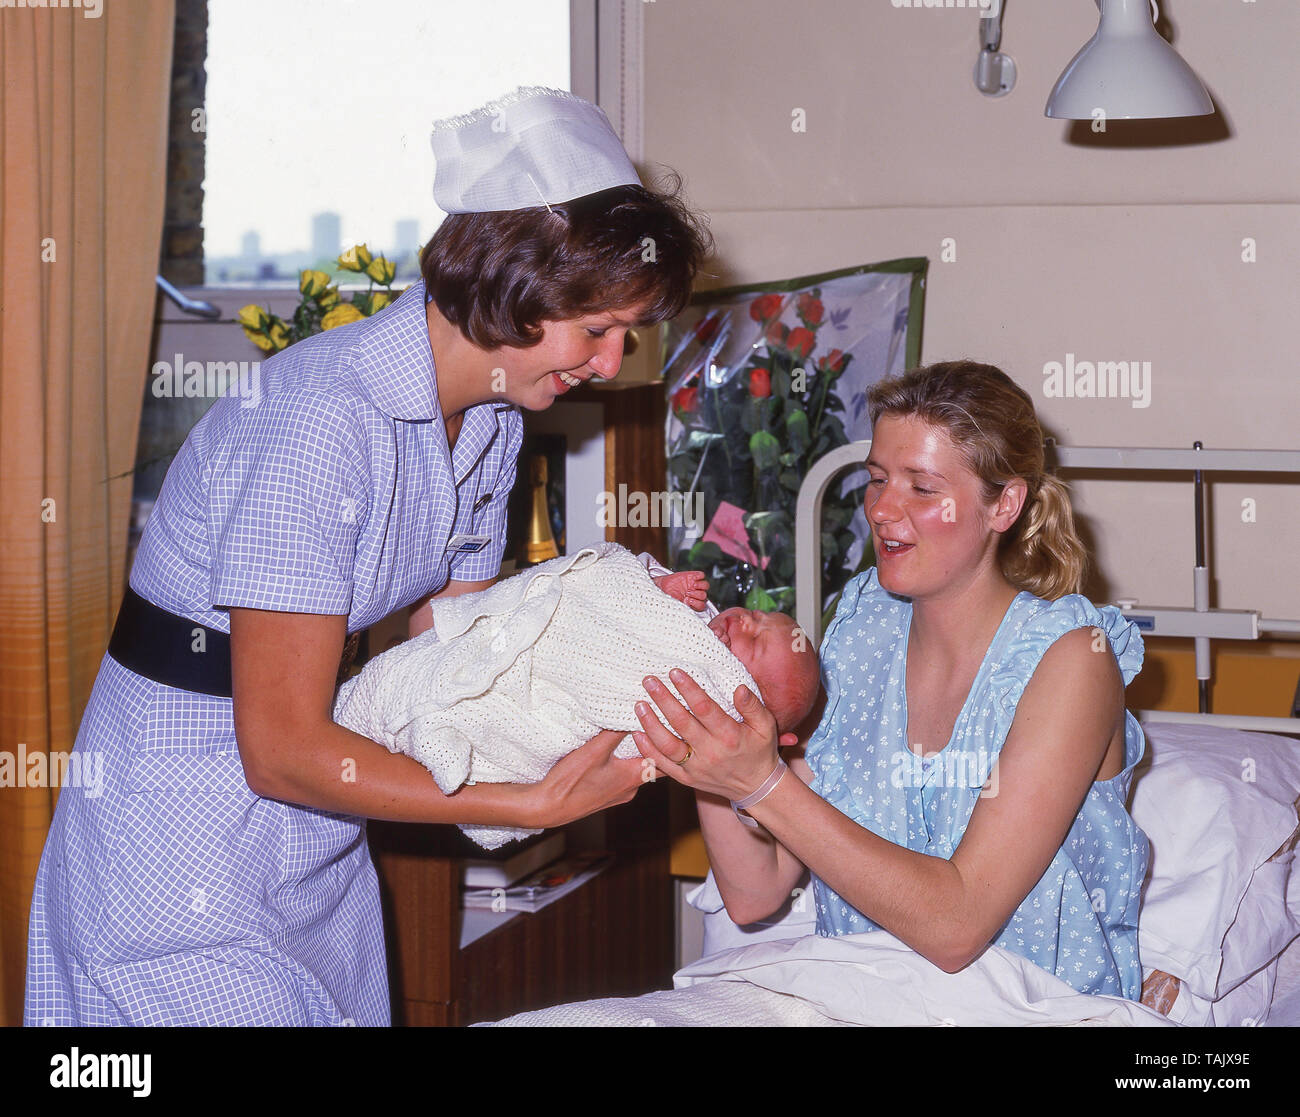 Midwife handing baby to young mother in maternity ward in private hospital, Greater London, England, United Kingdom Stock Photo